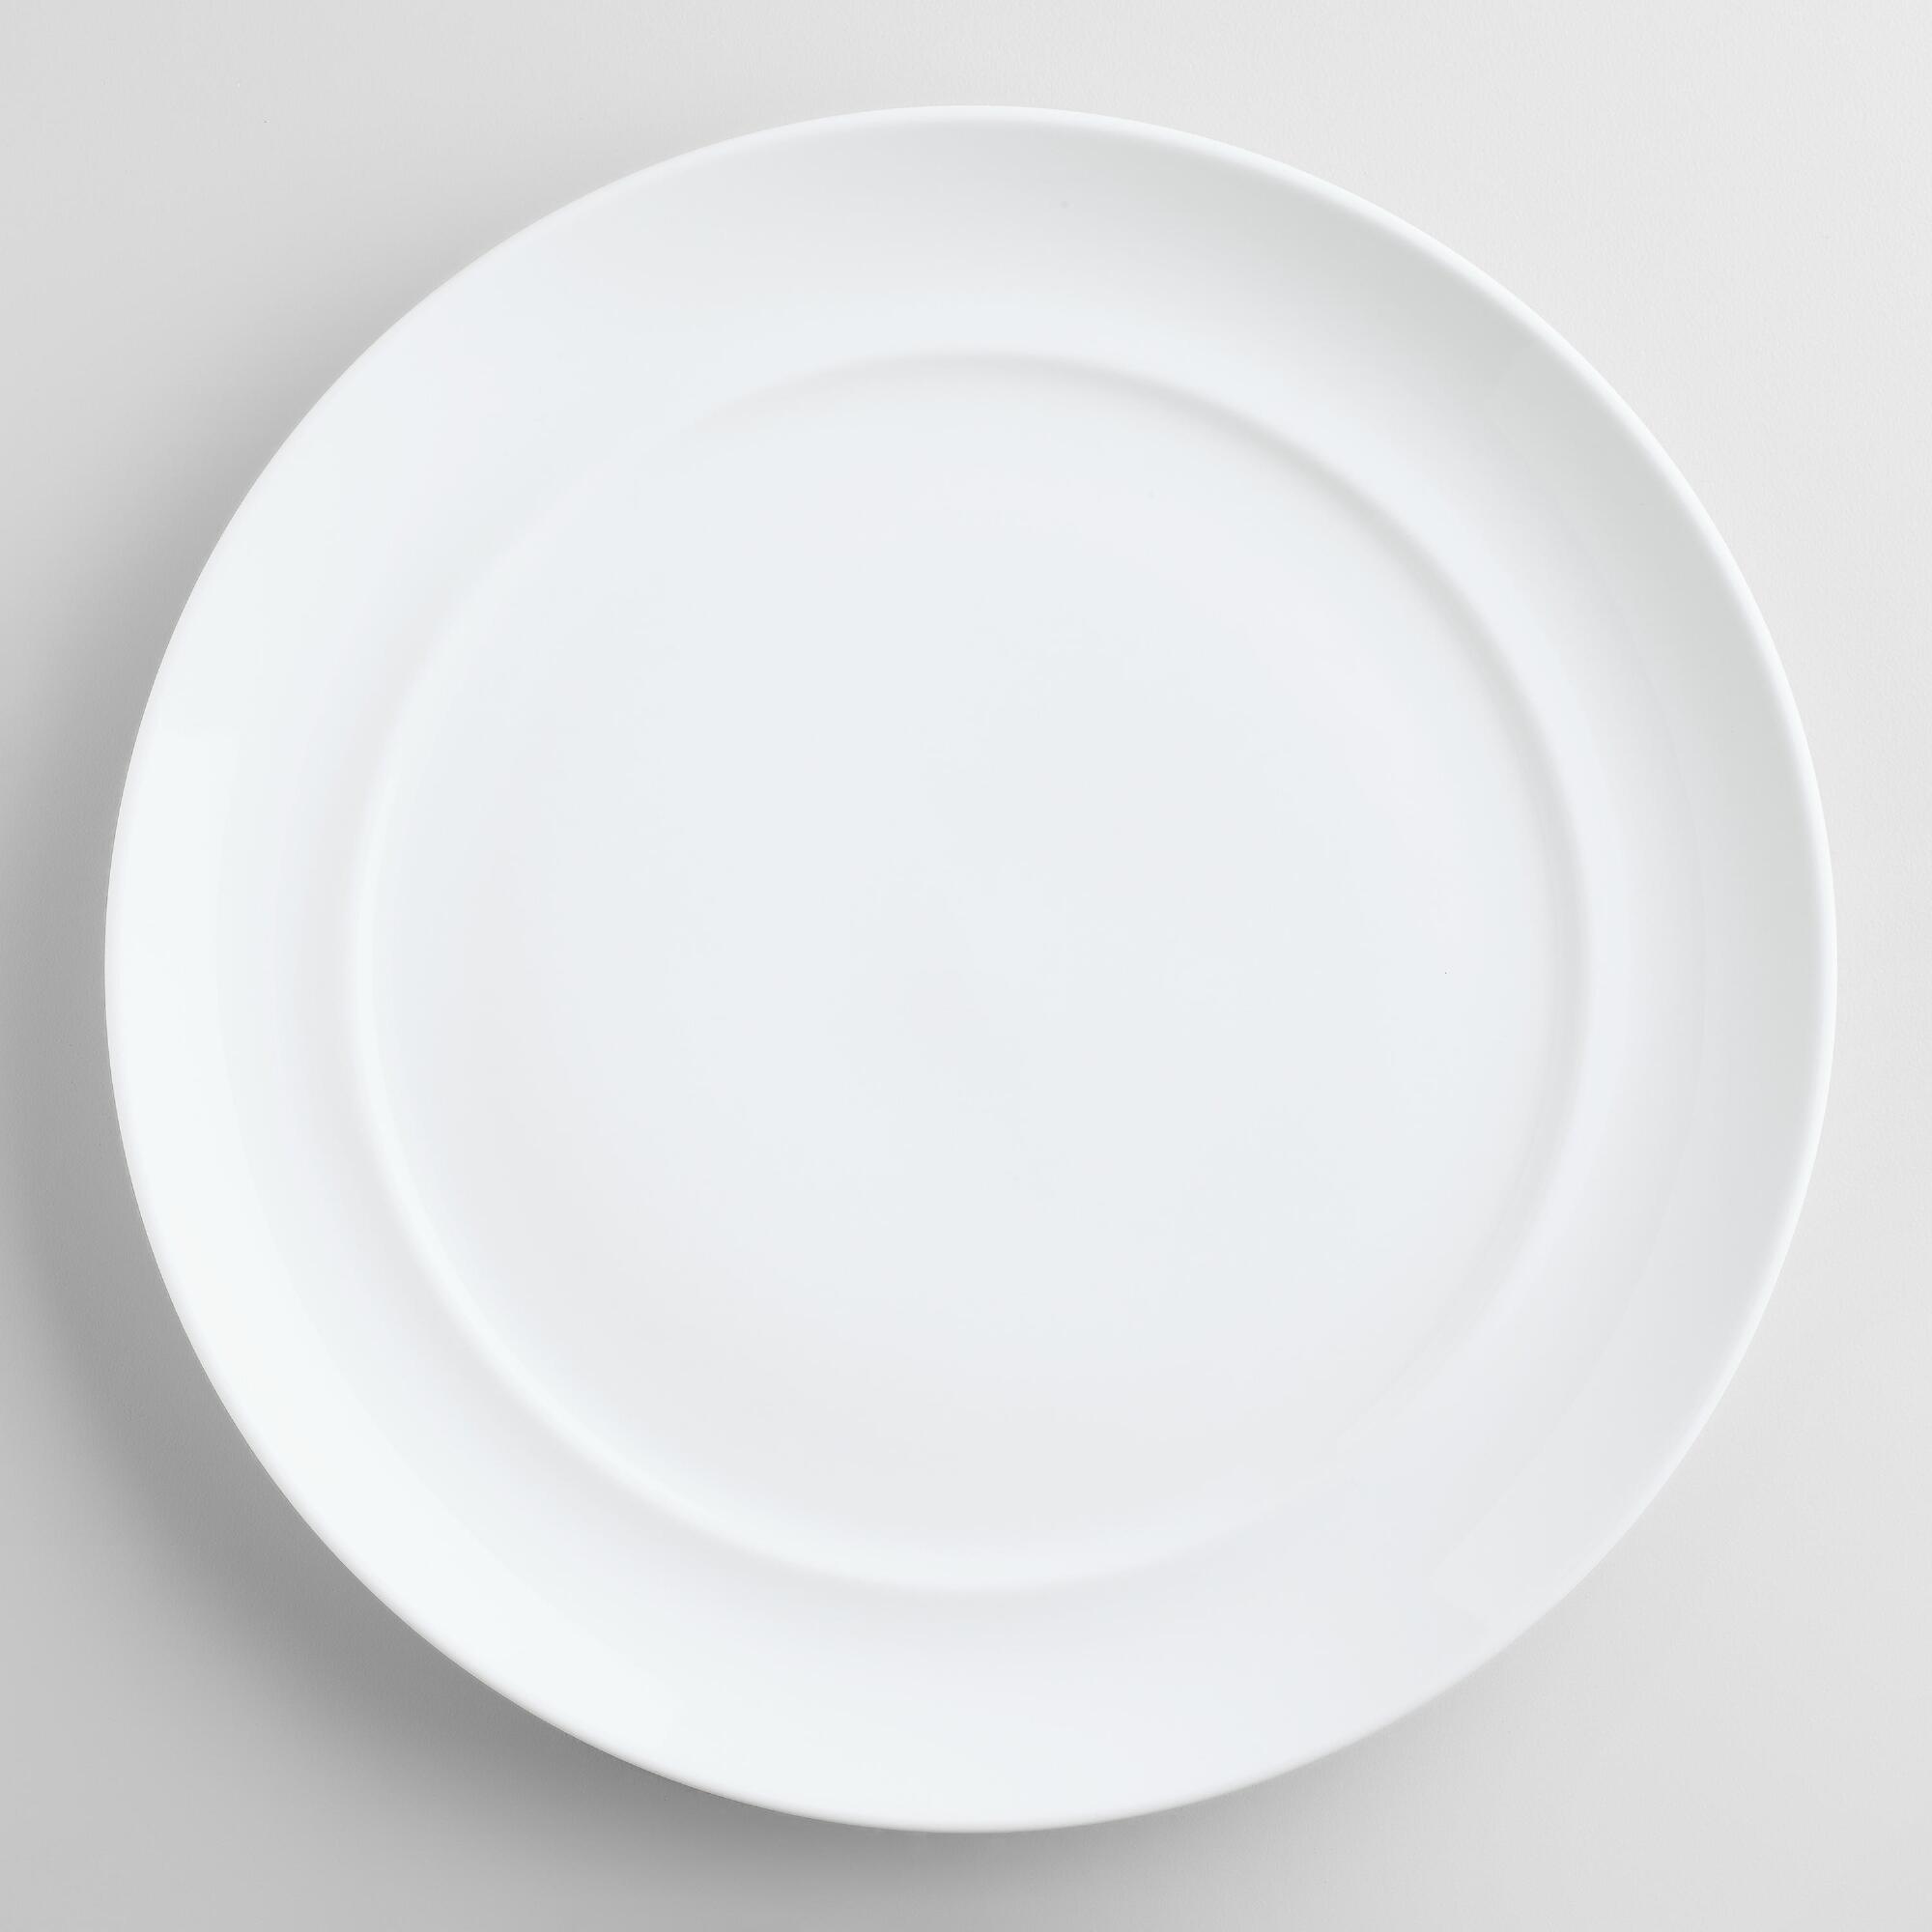 stock image of a plate